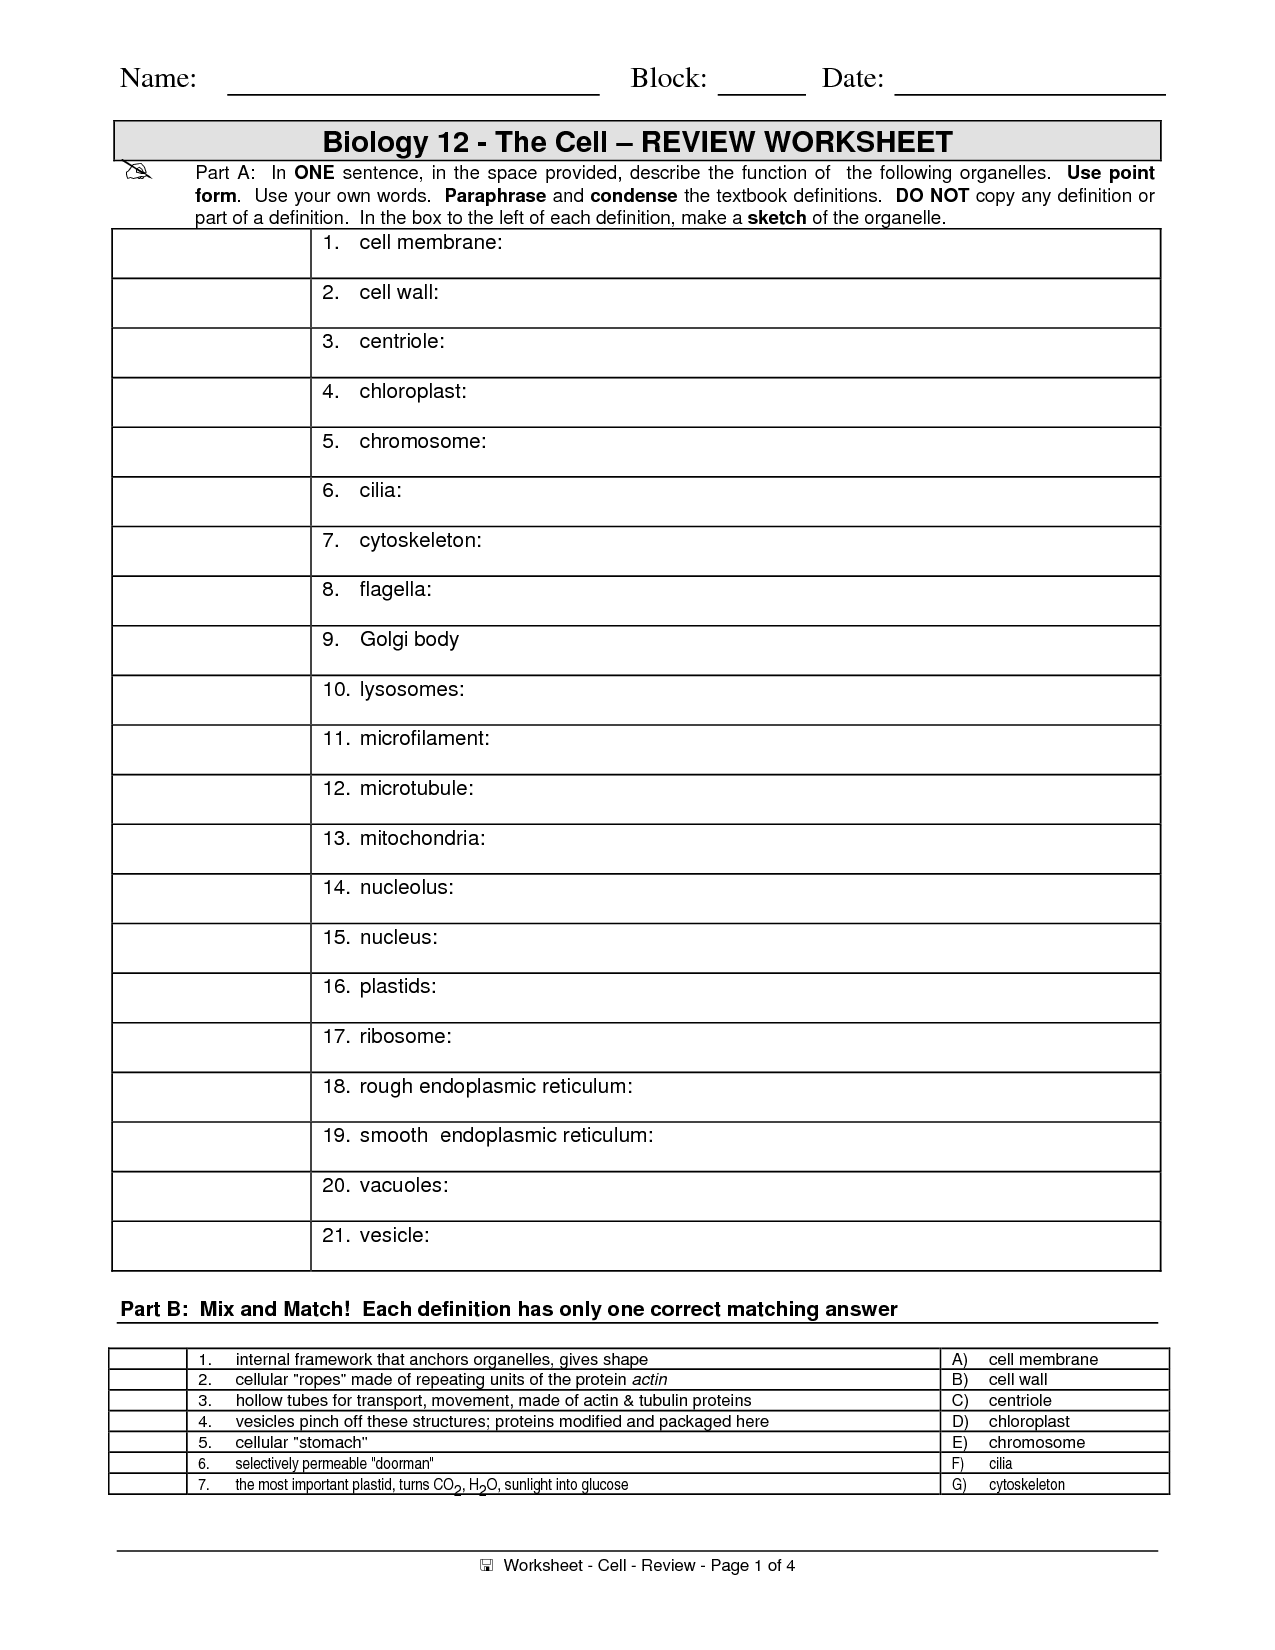 16-best-images-of-the-12-cell-review-worksheet-answers-biology-cell-organelles-worksheet